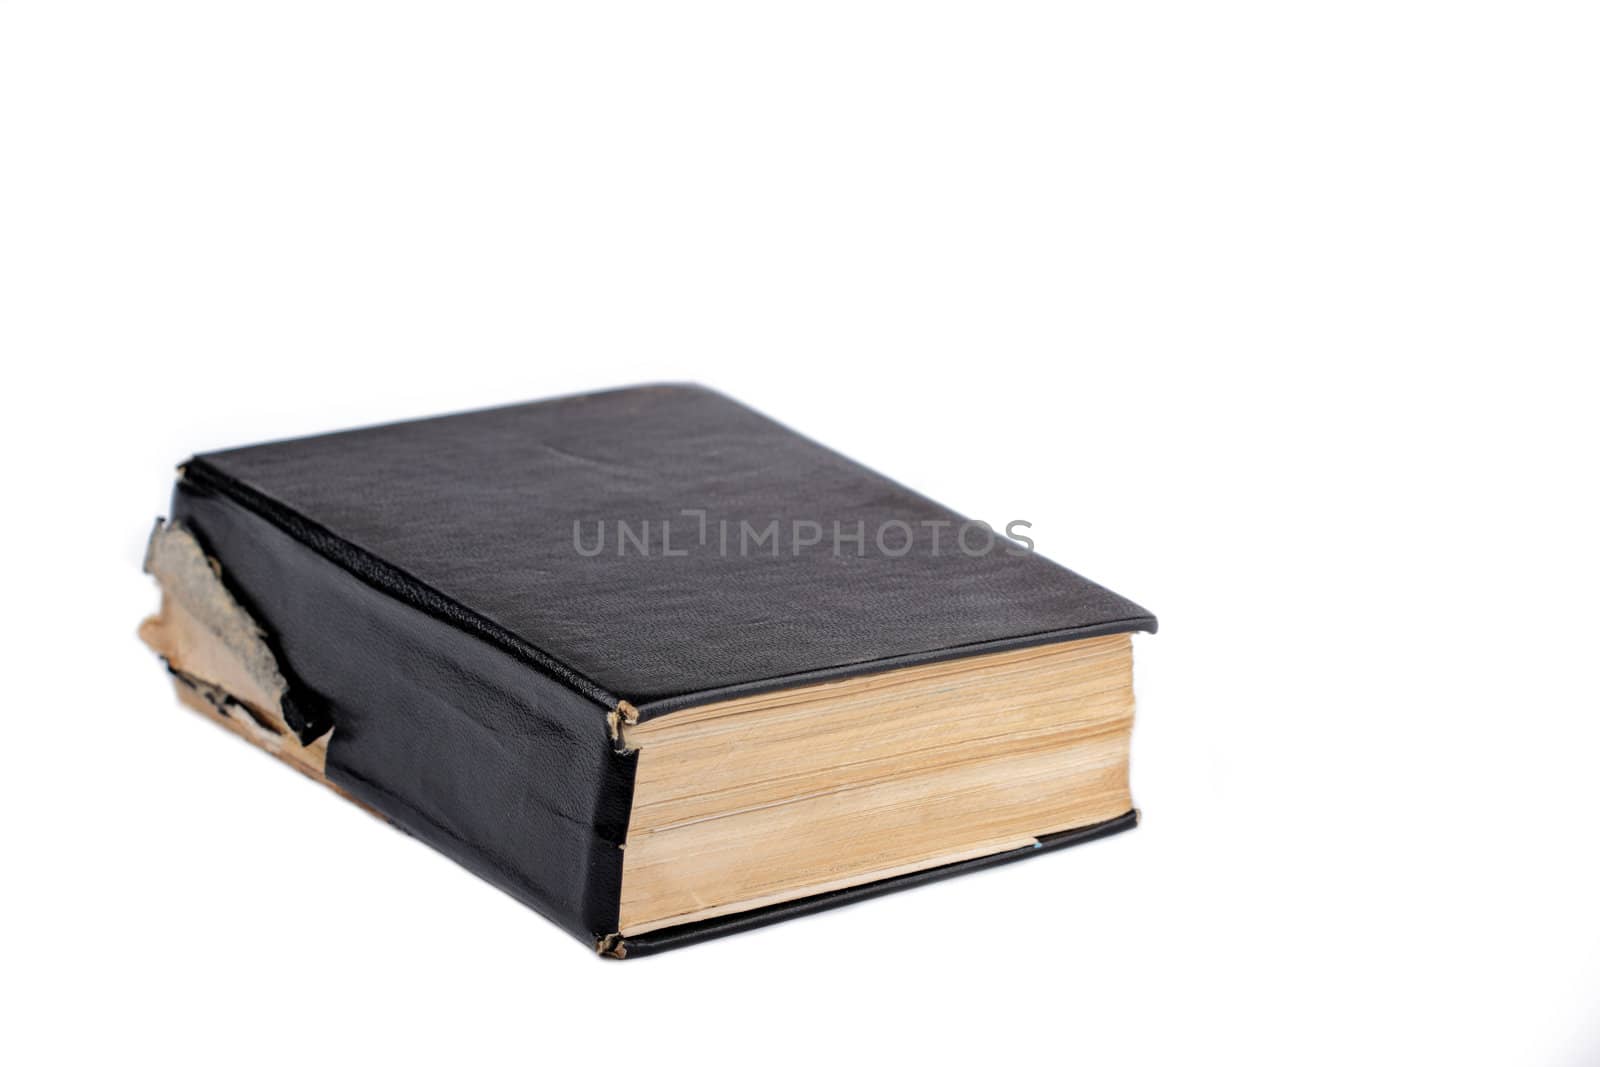 Old black covered closed book against white background